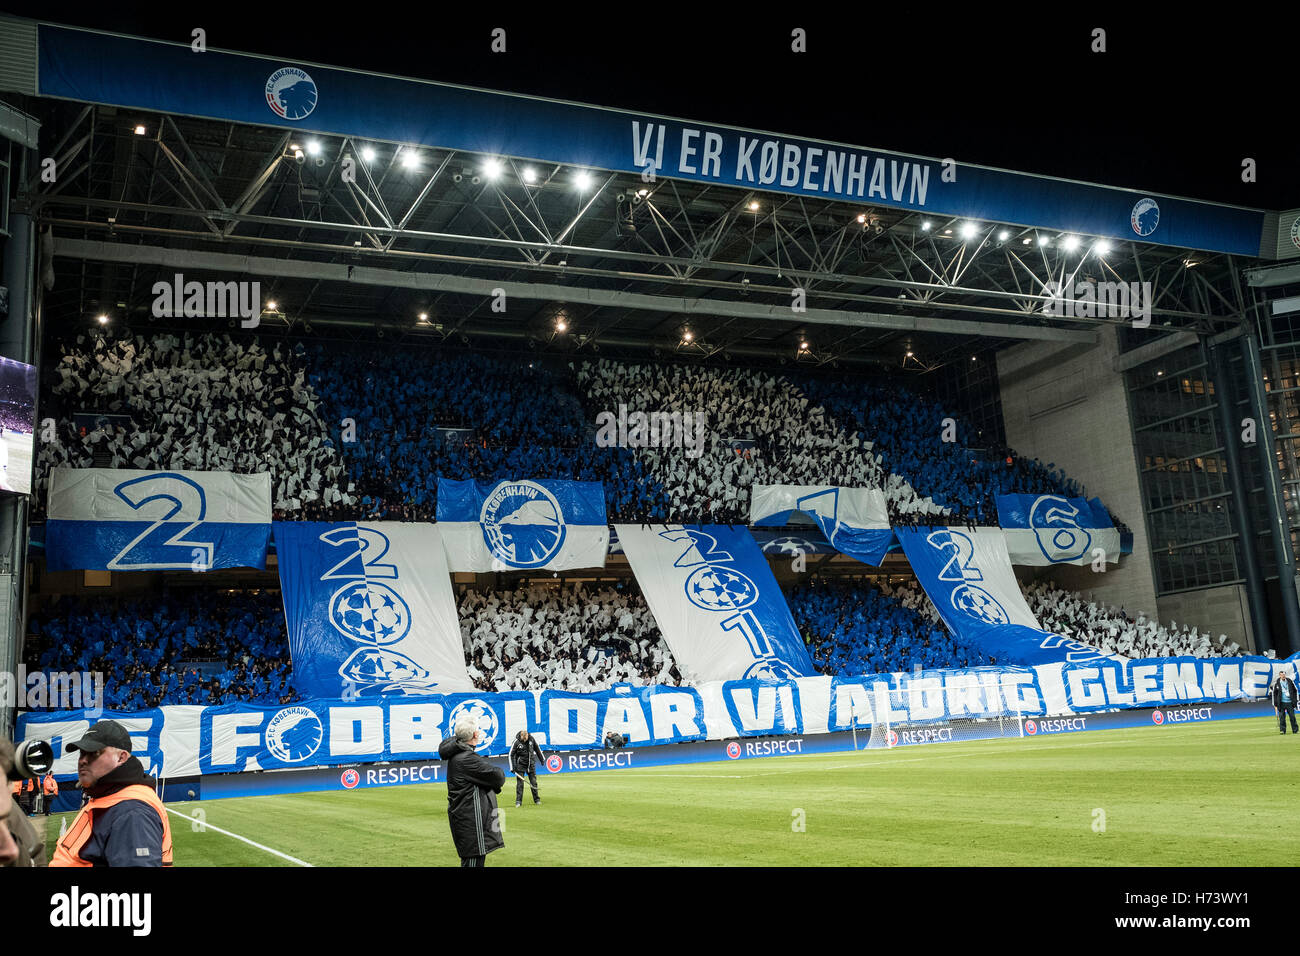 Denmark, Copenhagen, November 2nd 2016. The FC Copenhagen fans welcome the  local heroes with a giant tifo during the UEFA Champions League's Group G  match between FC Copenhagen and Leicester City at